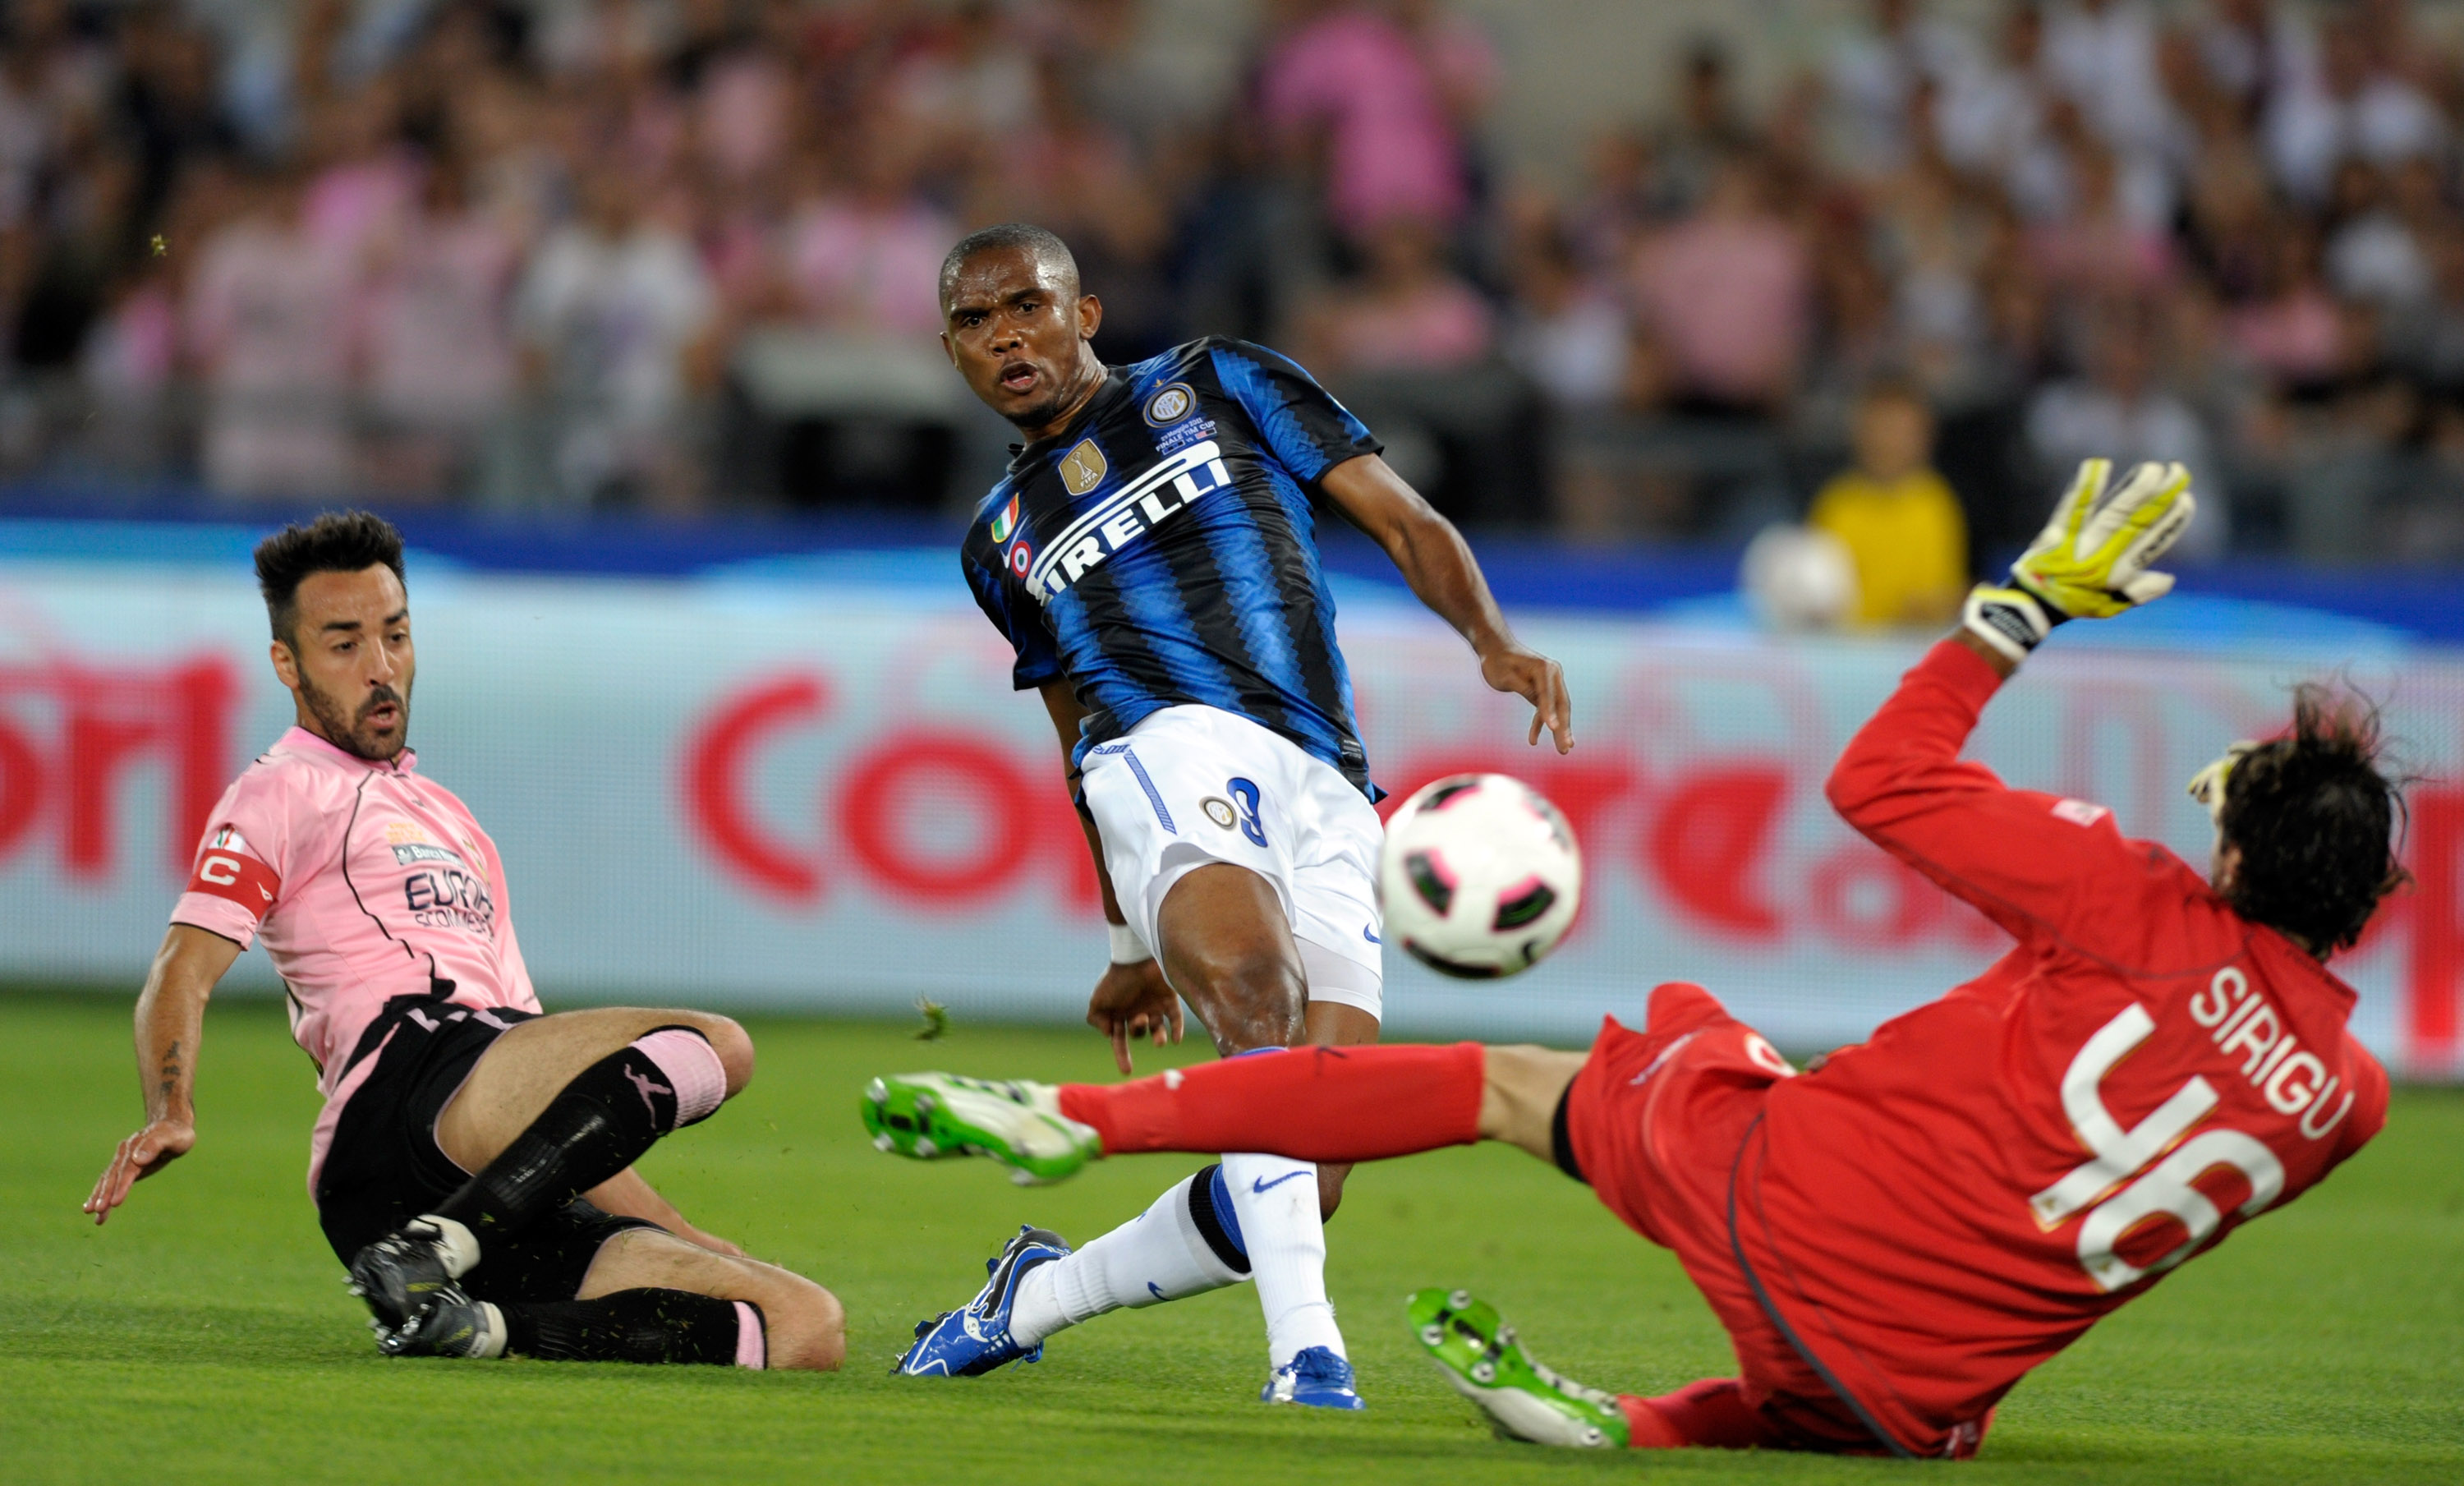 ROME, ITALY - MAY 29:  Samuel Eto'o of Inter Milan scores the first goal during the Tim Cup final between FC Internazionale Milano and US Citta di Palermo at Olimpico Stadium on May 29, 2011 in Rome, Italy.  (Photo by Claudio Villa/Getty Images)